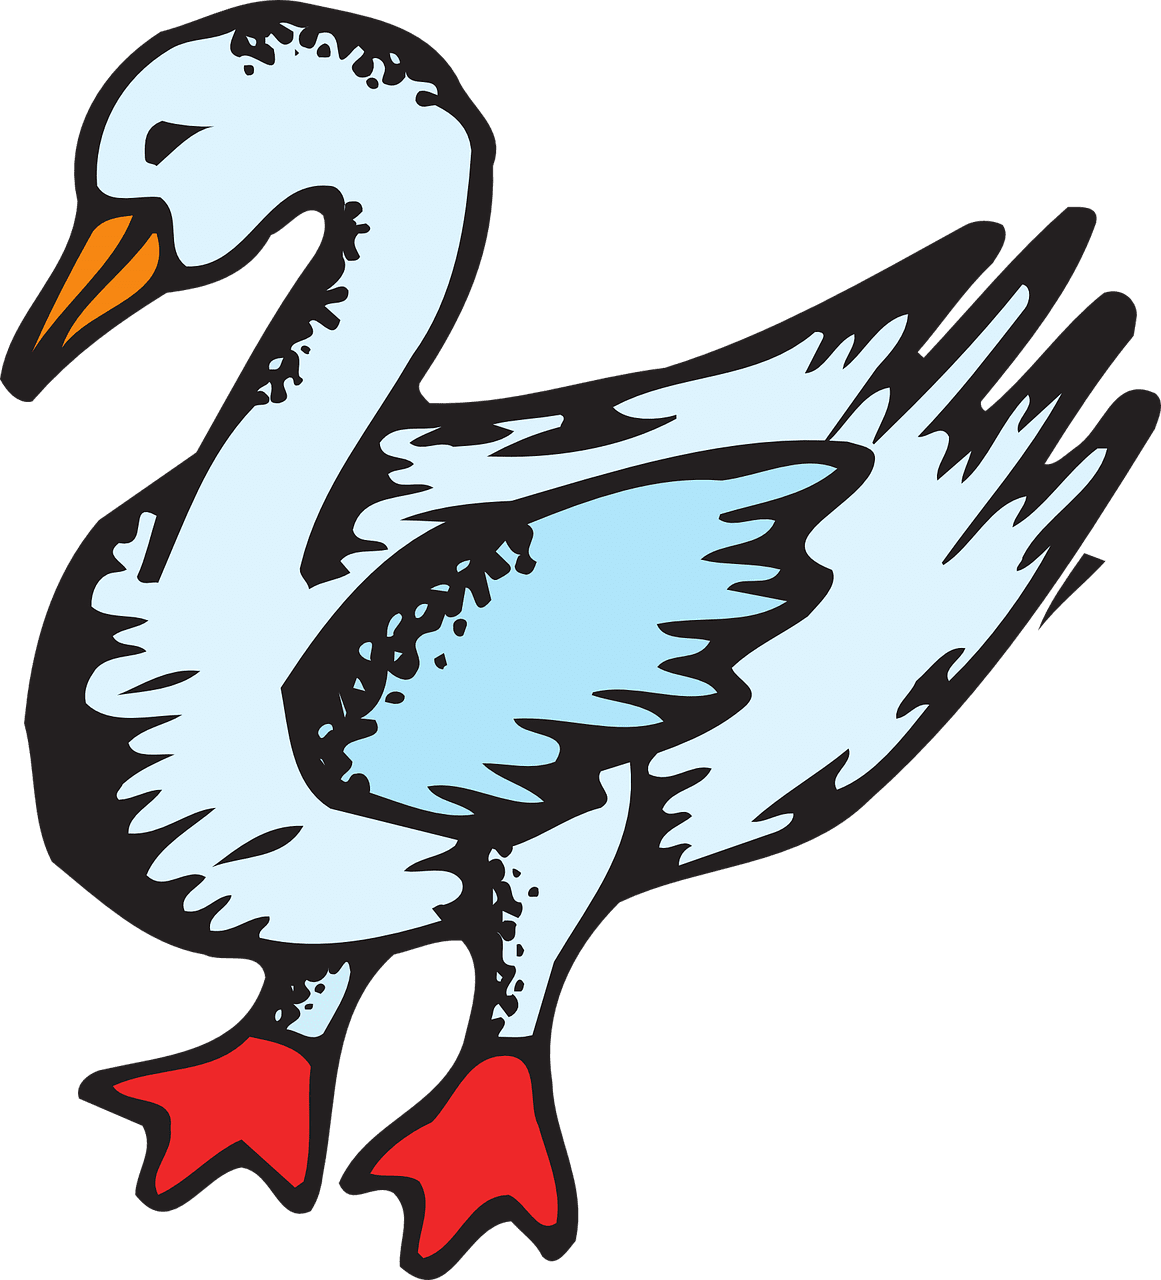 Goose stylized blue feet style wings image from clipart